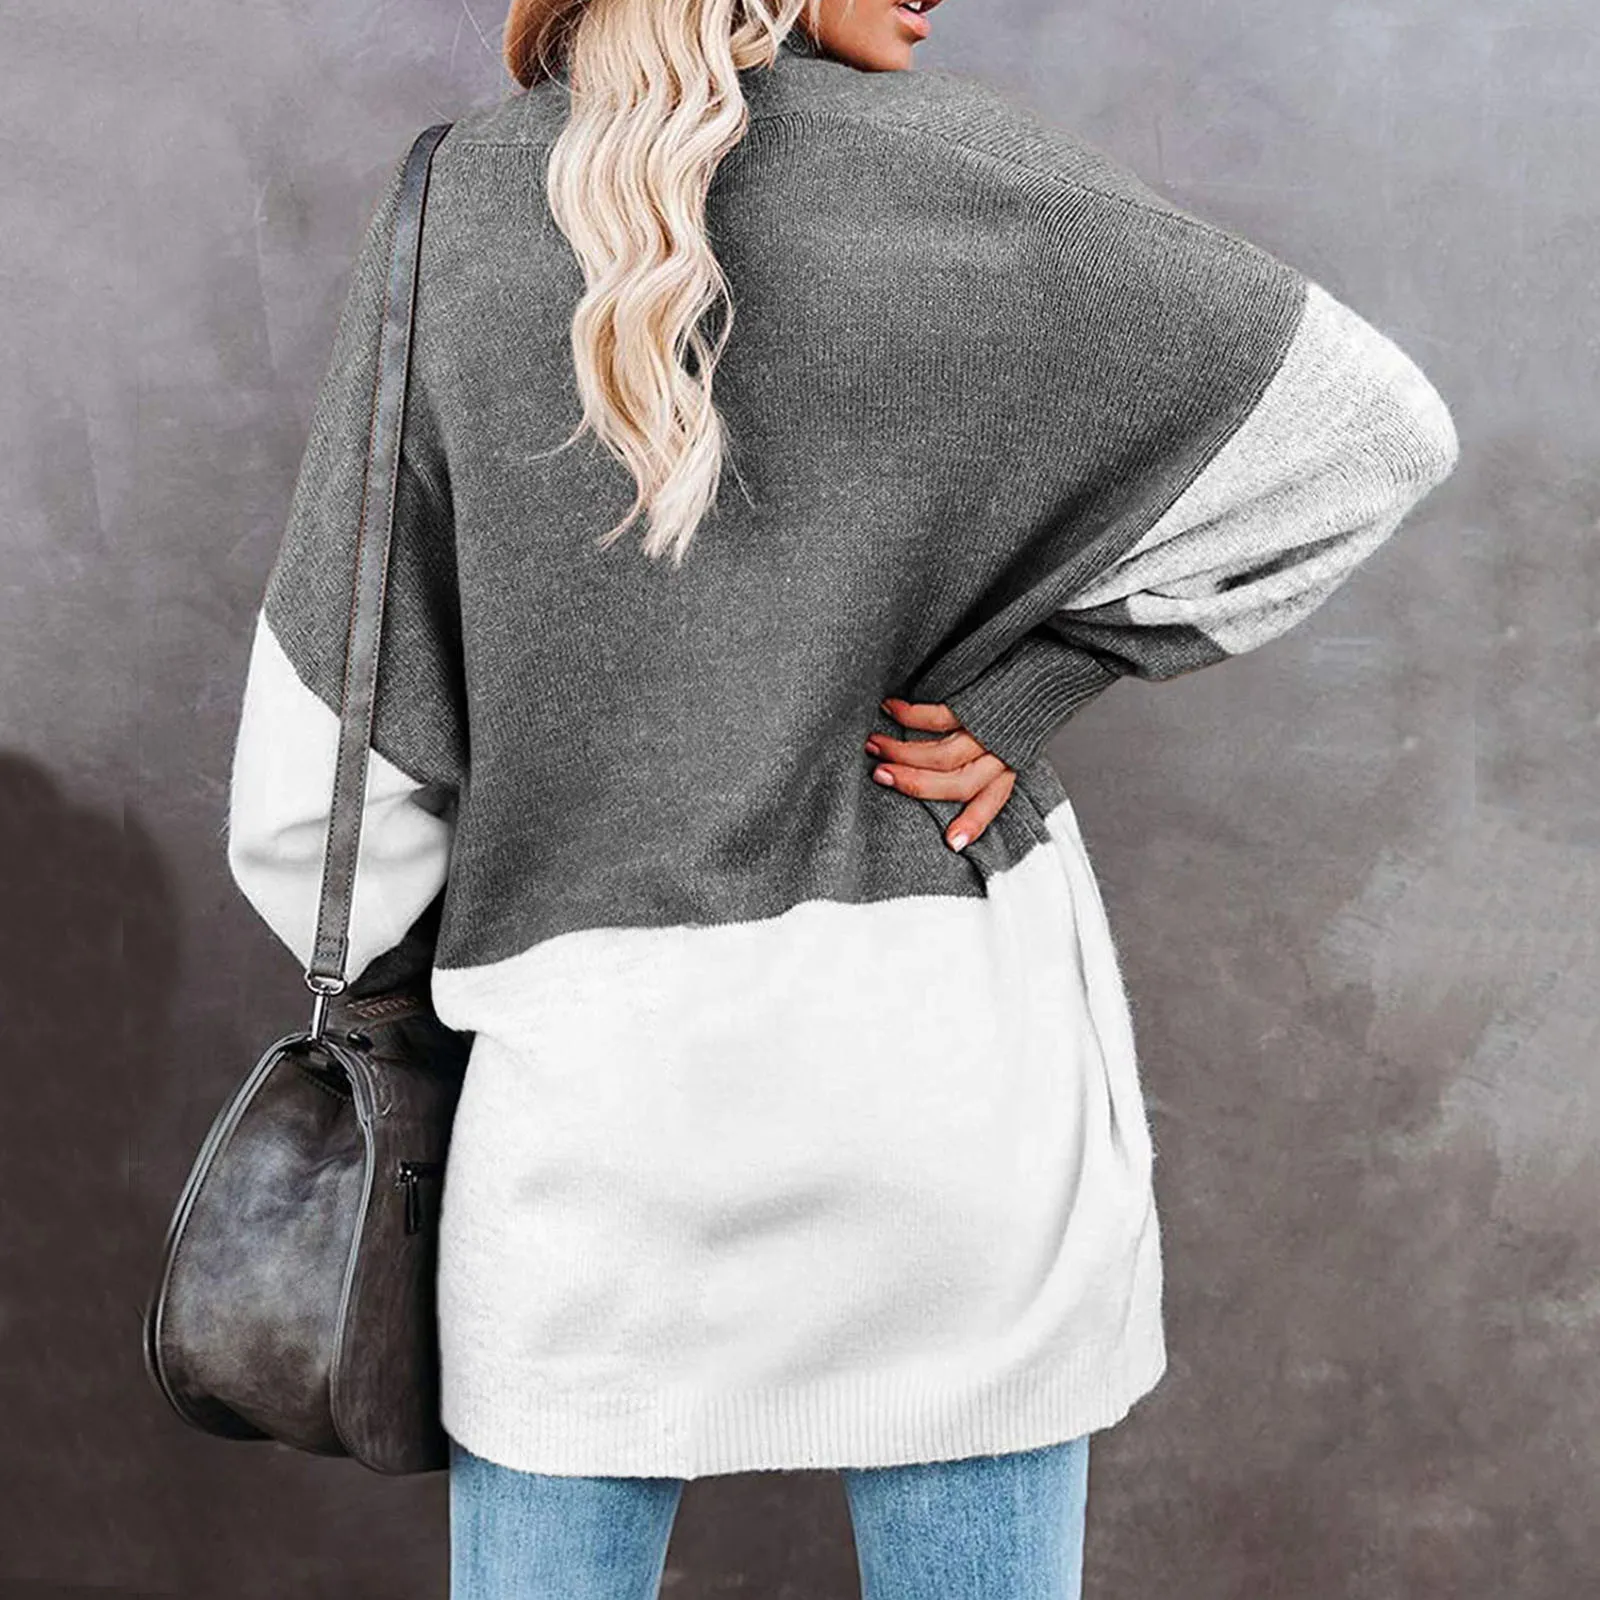 turtleneck sweater Autumn Winter Women Sweater Striped Knitted Cardigans Fashion Batwing Sleeve Long Sleeve Top Open Front Casual Knit Sweater Coat christmas sweatshirt